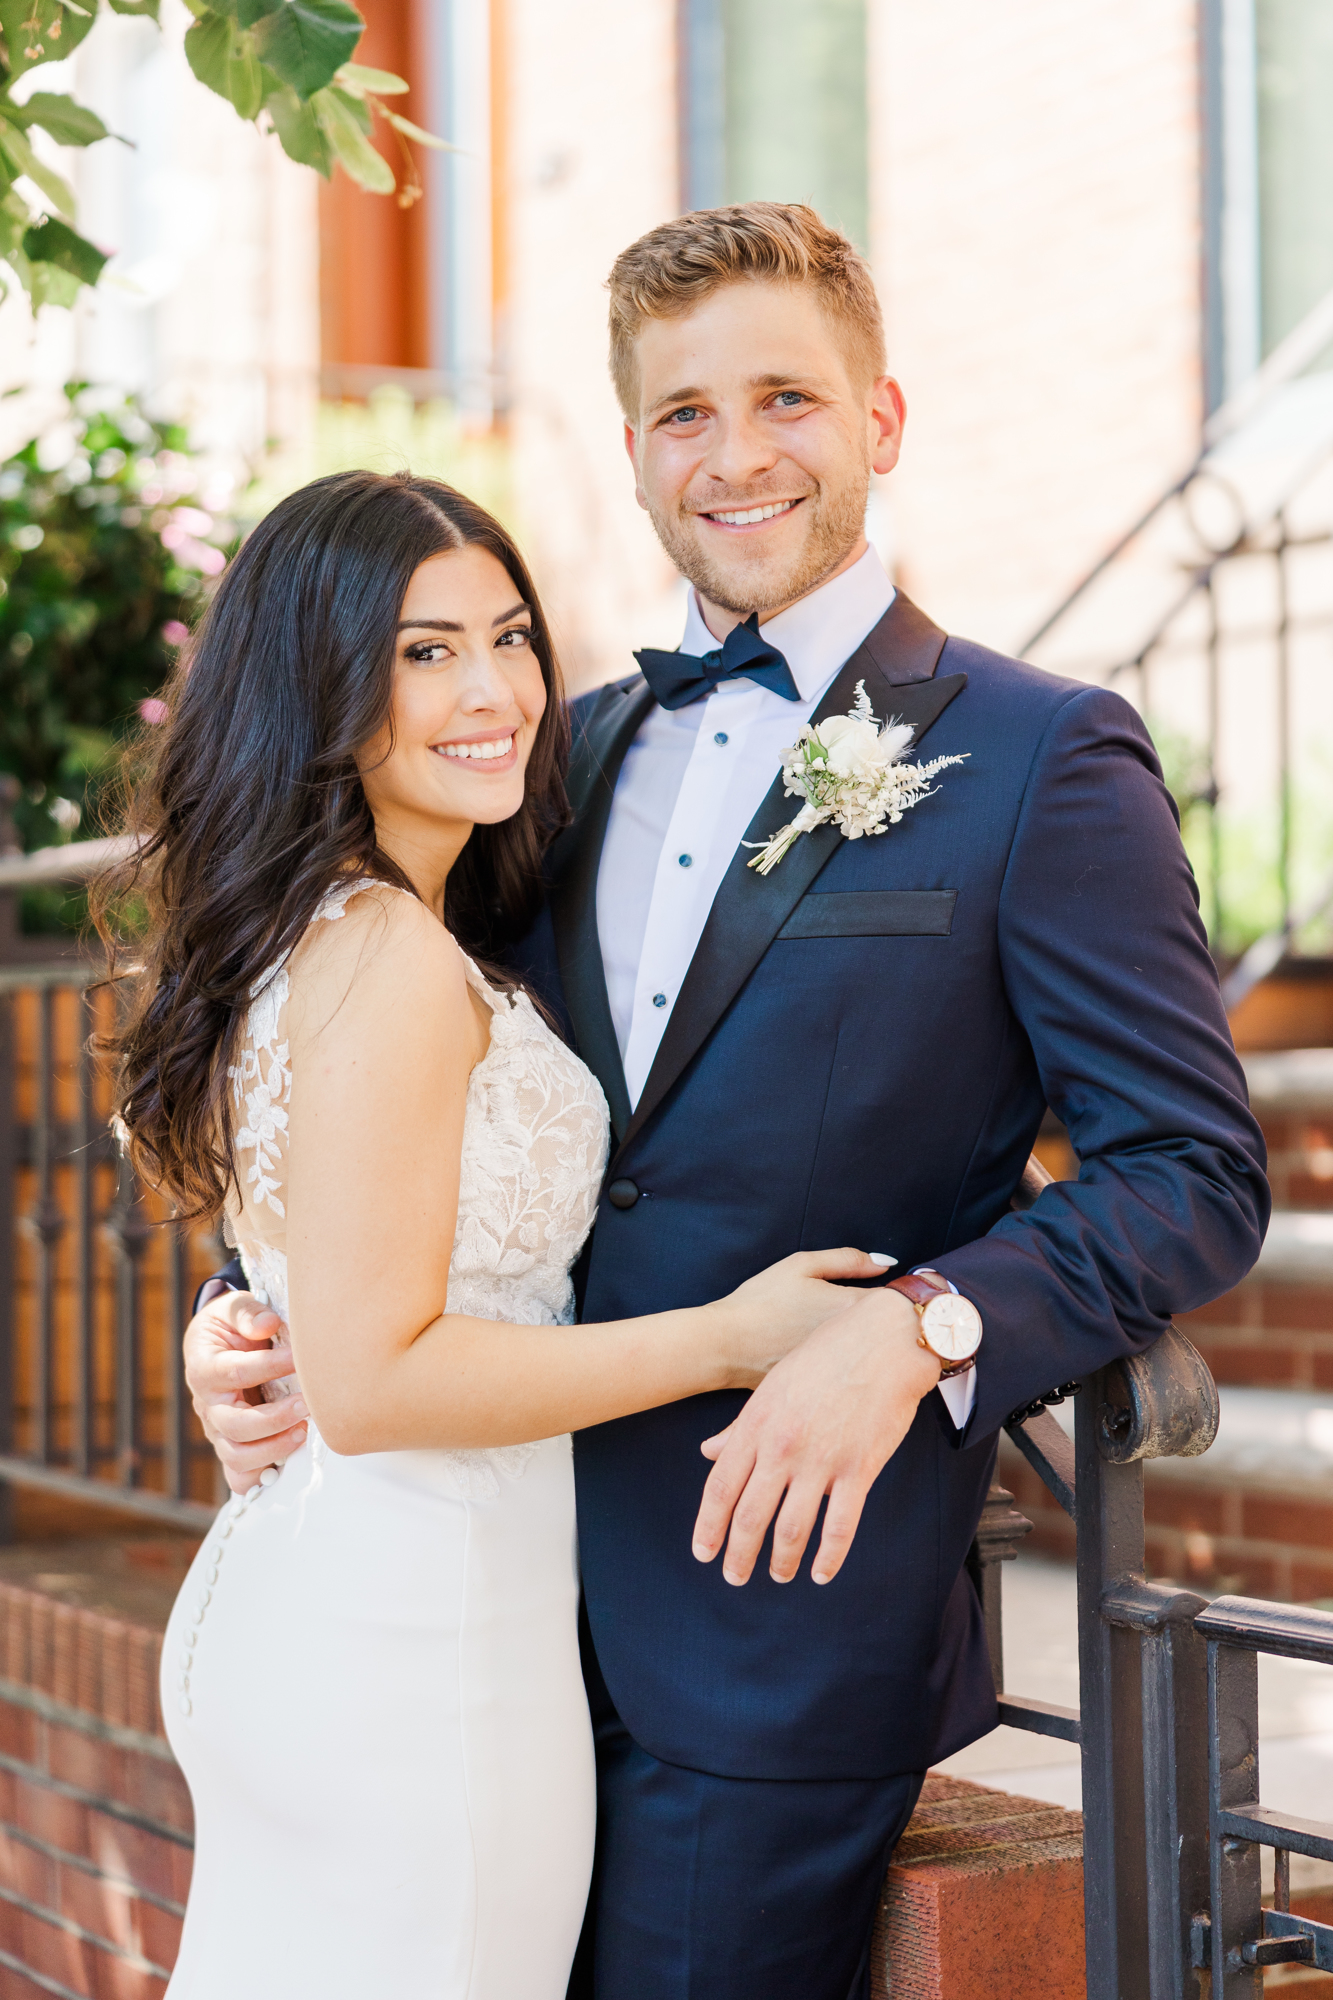 Personal NYC Wedding at The Green Building in Brooklyn